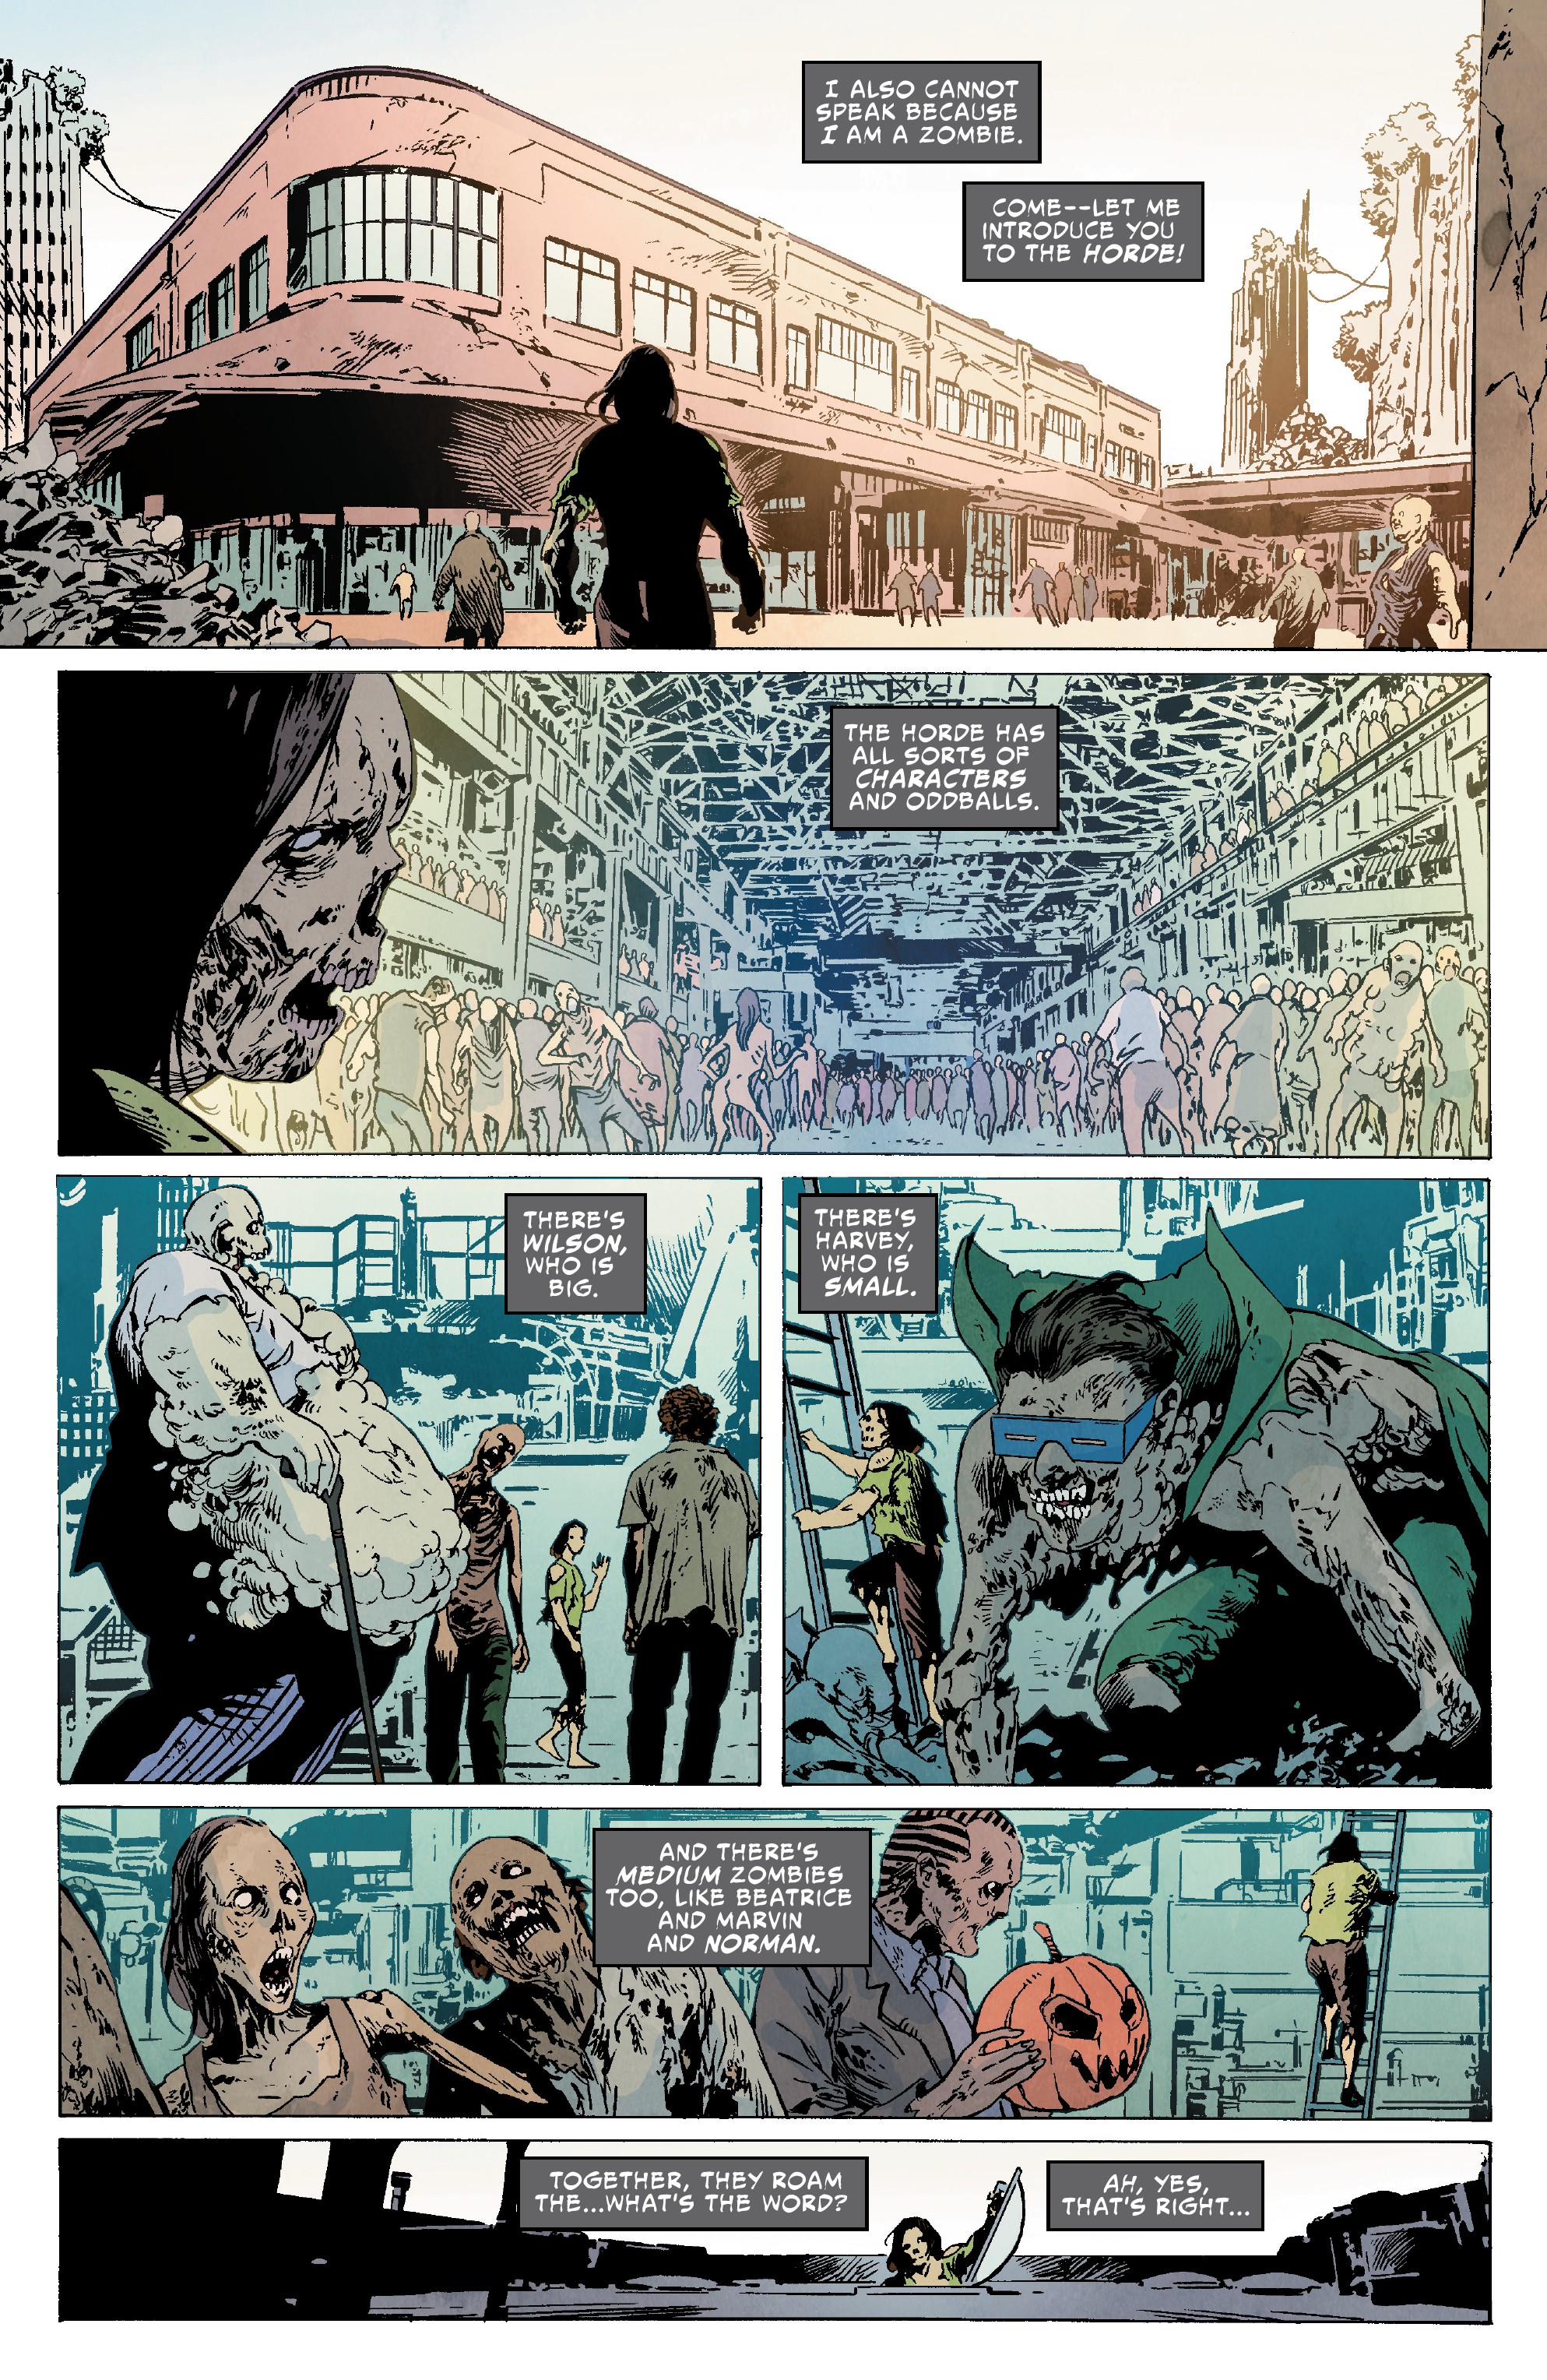 Marvel Zombie (2018-): Chapter 1 - Page 4